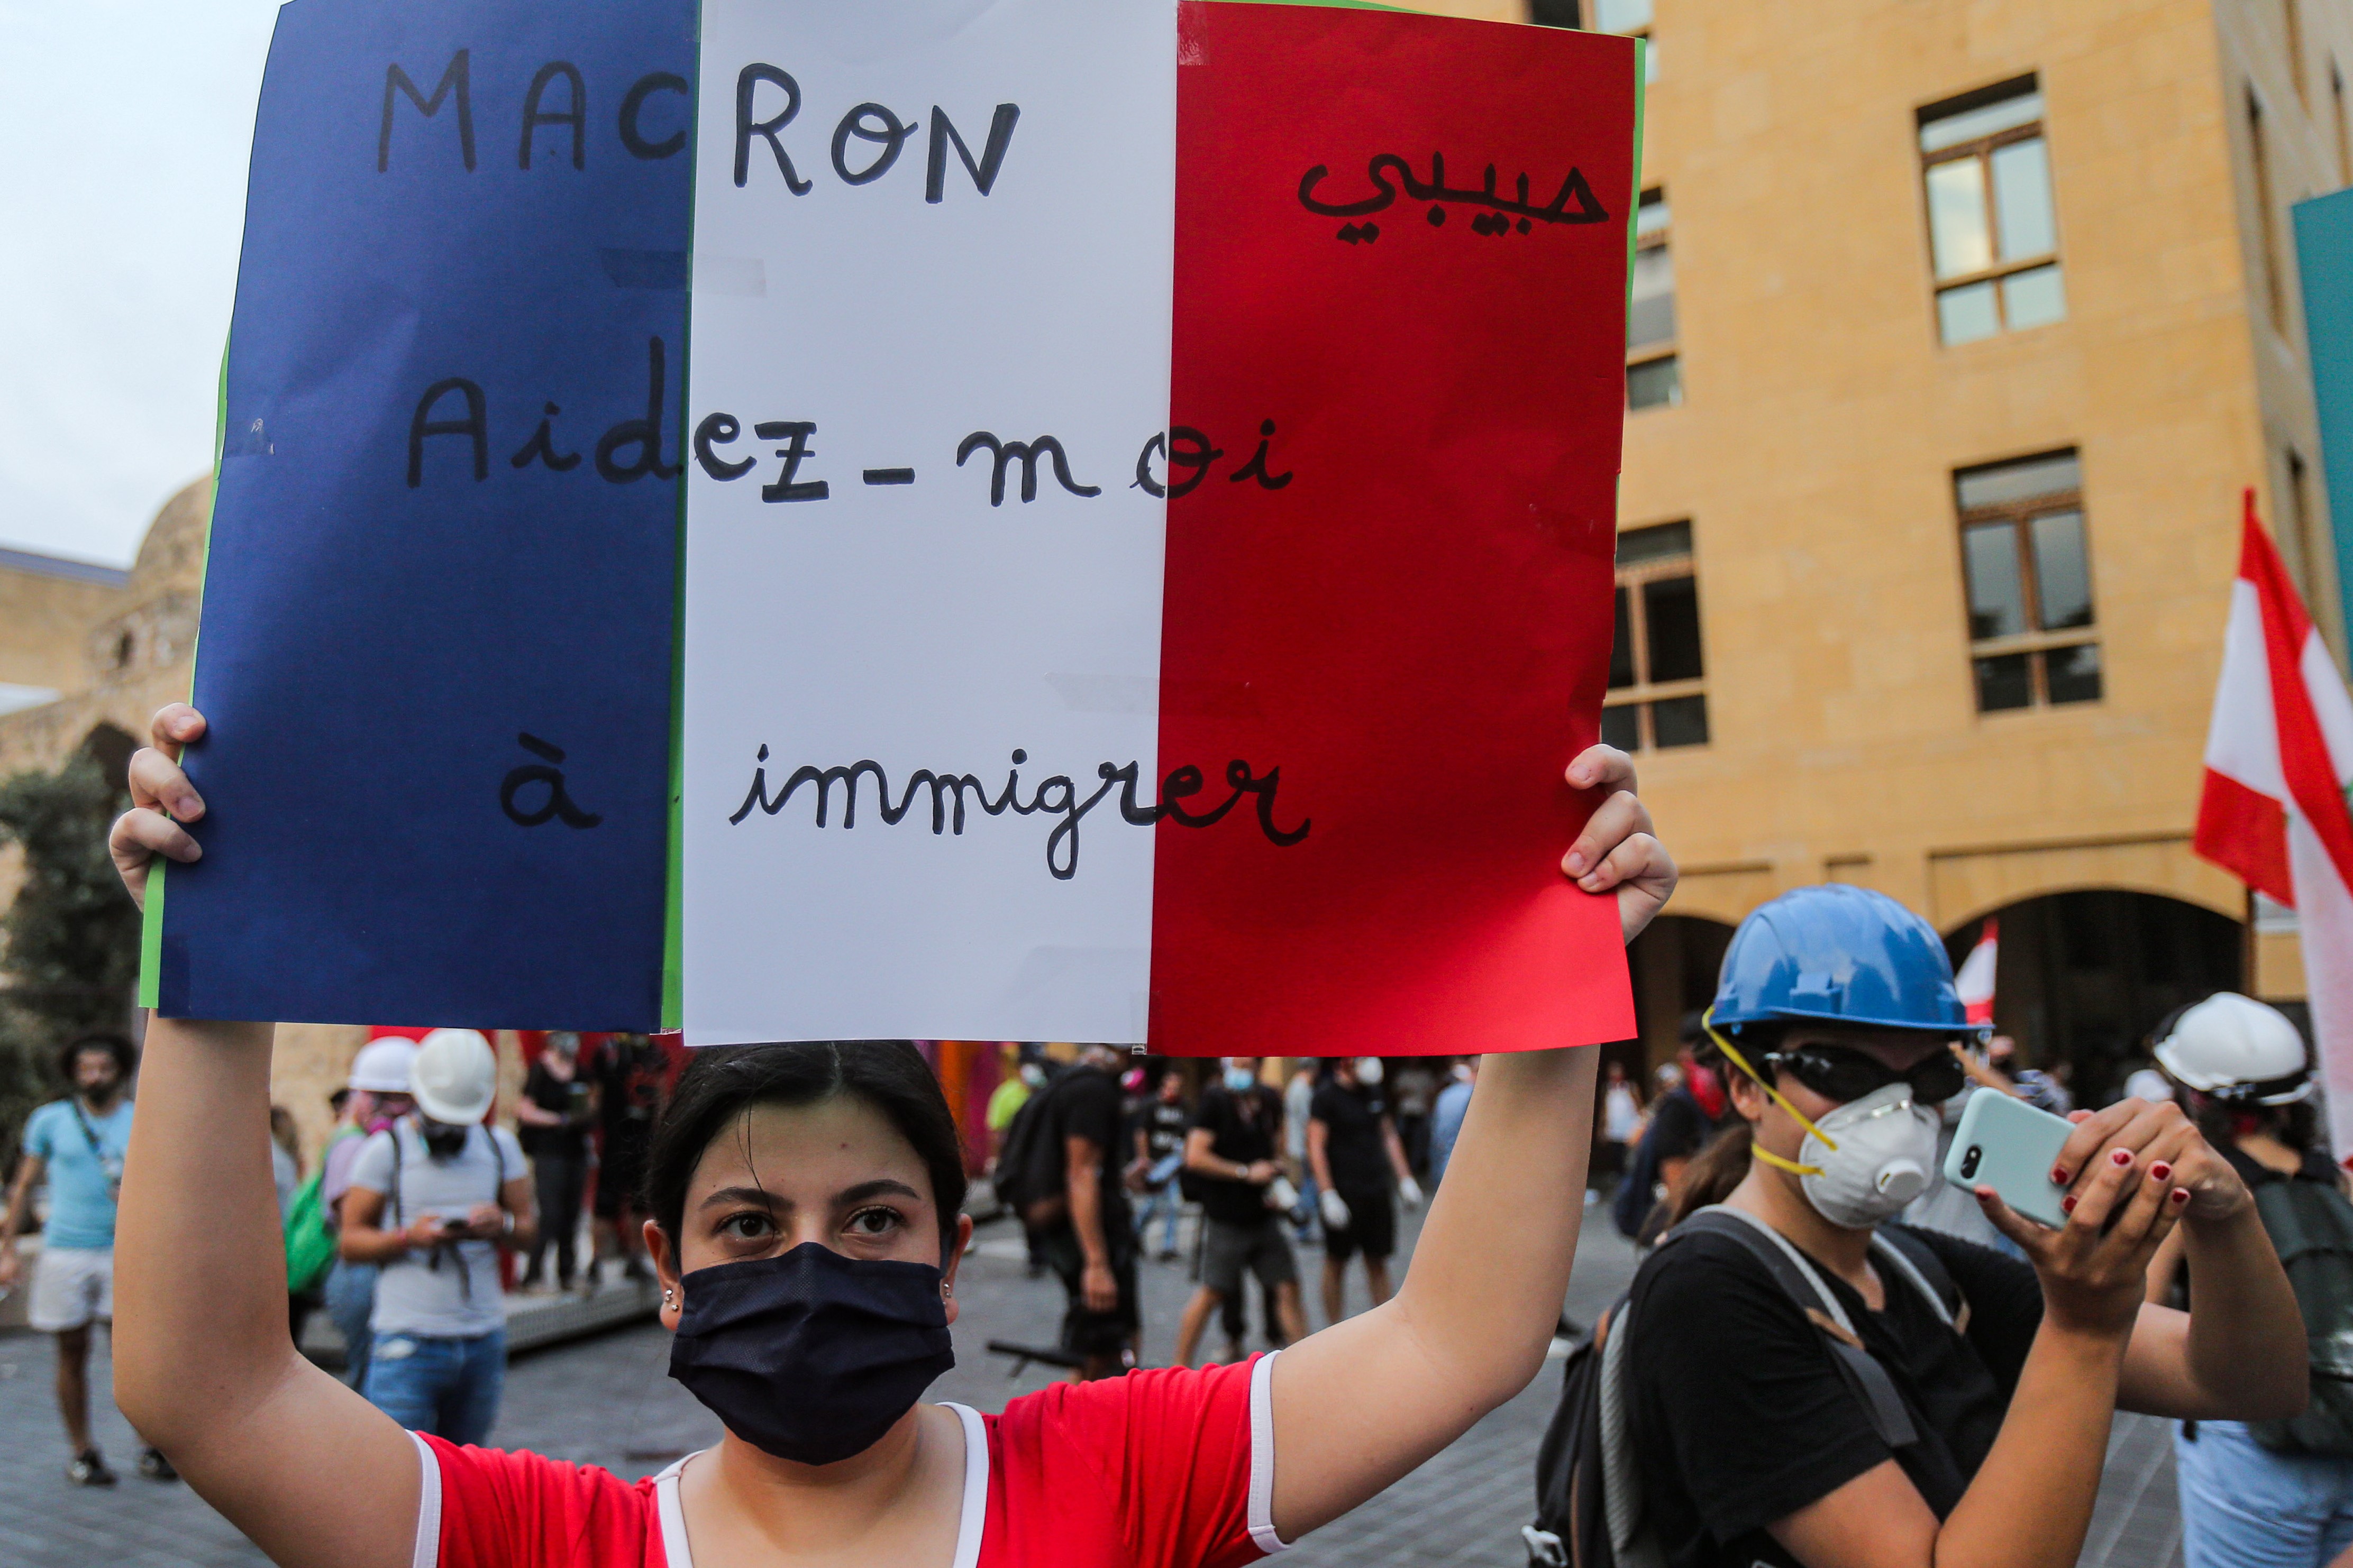 A mask-clad protester holds up a sign showing the French flag with text in Arabic and French reading "Macron, my love, help me to immigrate"